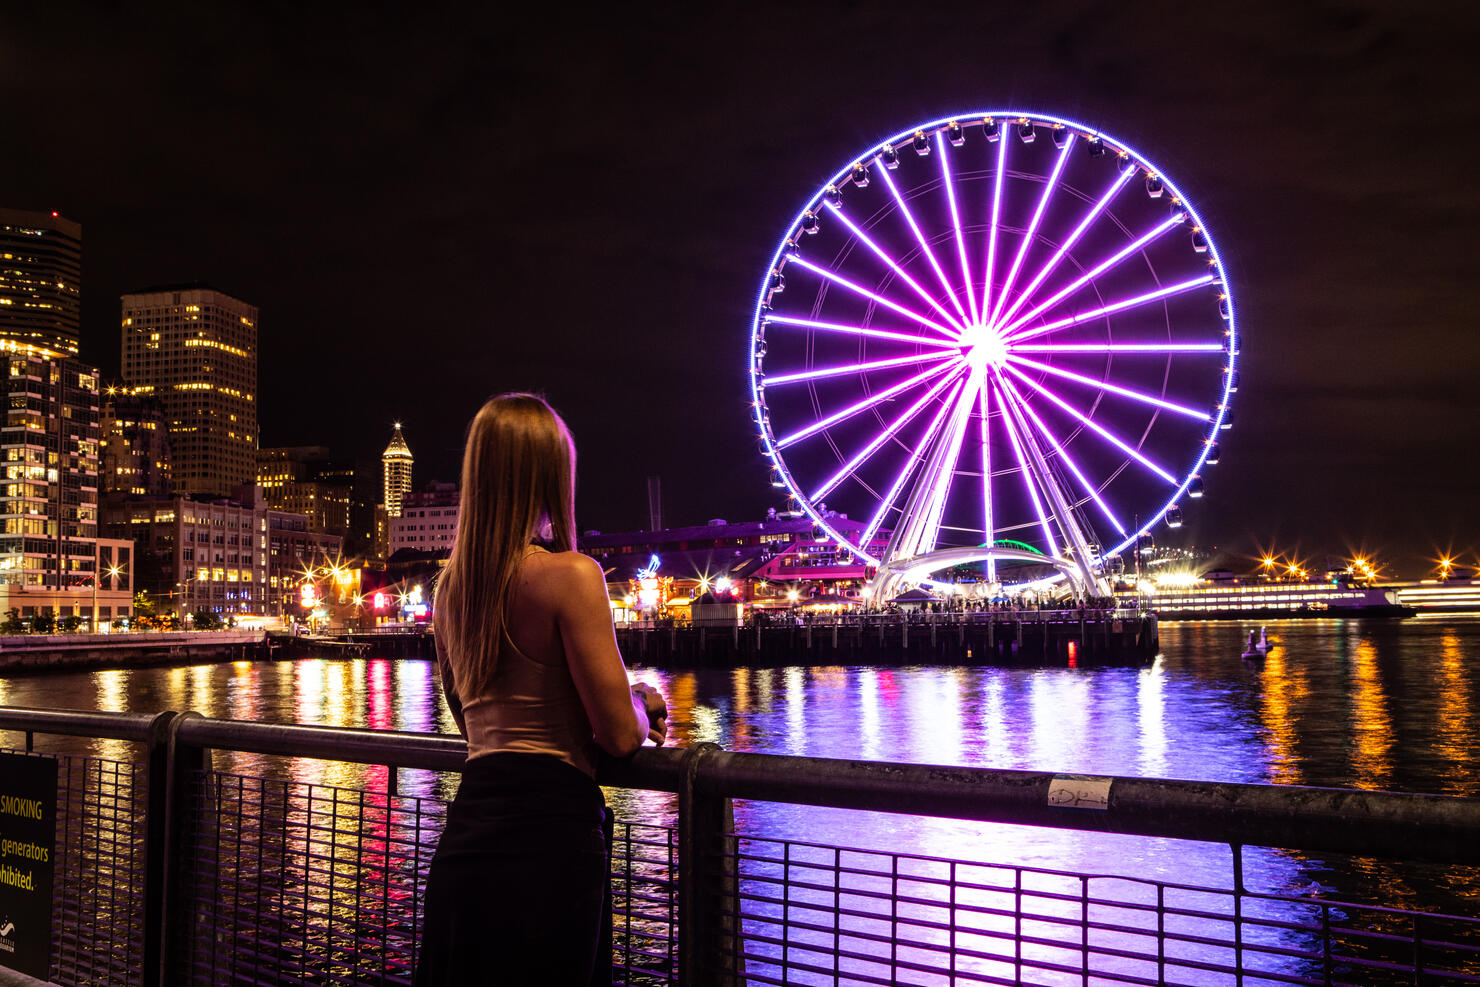 Woman Standing Alone Looking at Seattle Washington at Night The Great Seattle Wheel Lit Up Reflecting on Pier 69 Harbor in the Pacific Ocean Long Exposure Photo with City Lights in the Background